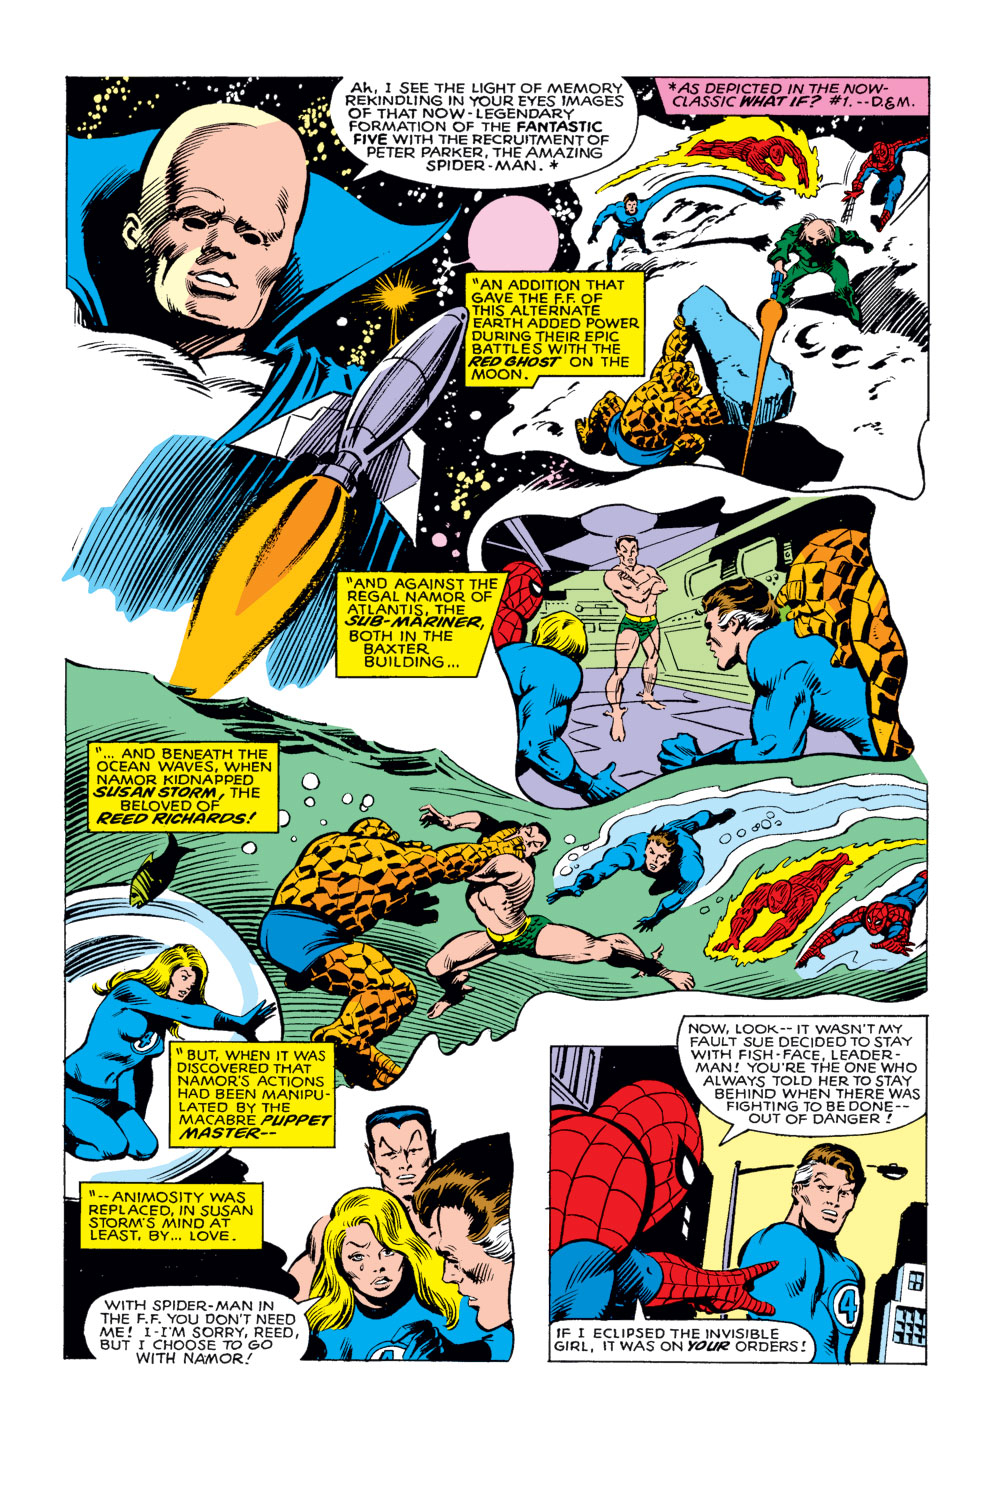 What If? (1977) issue 21 - Invisible Girl of the Fantastic Four married the Sub-Mariner - Page 7